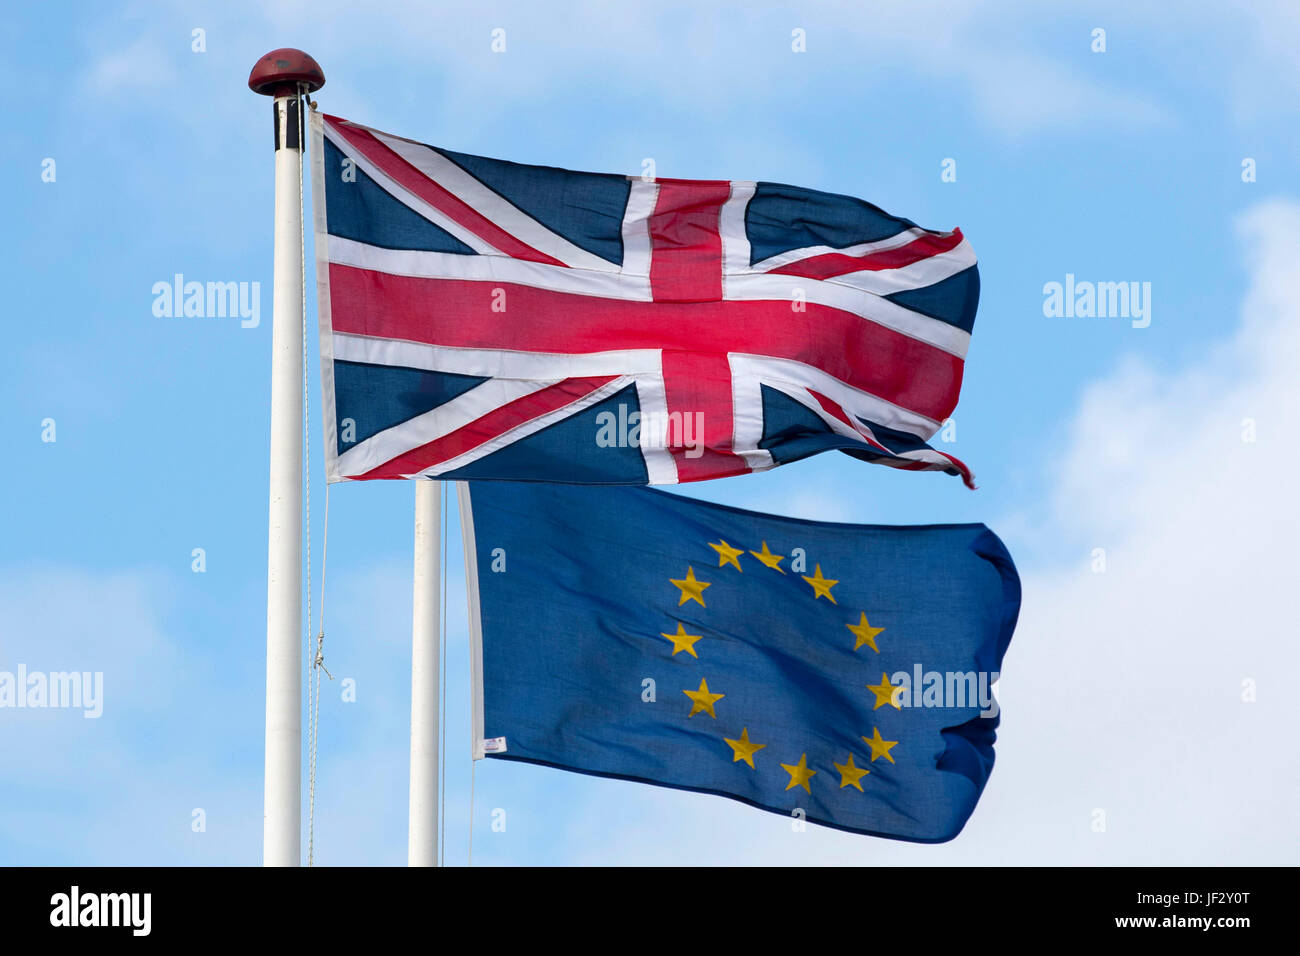 European Union and British Union Jack flags blow in the wind. The UK voted to leave the EU in a referendum. Stock Photo